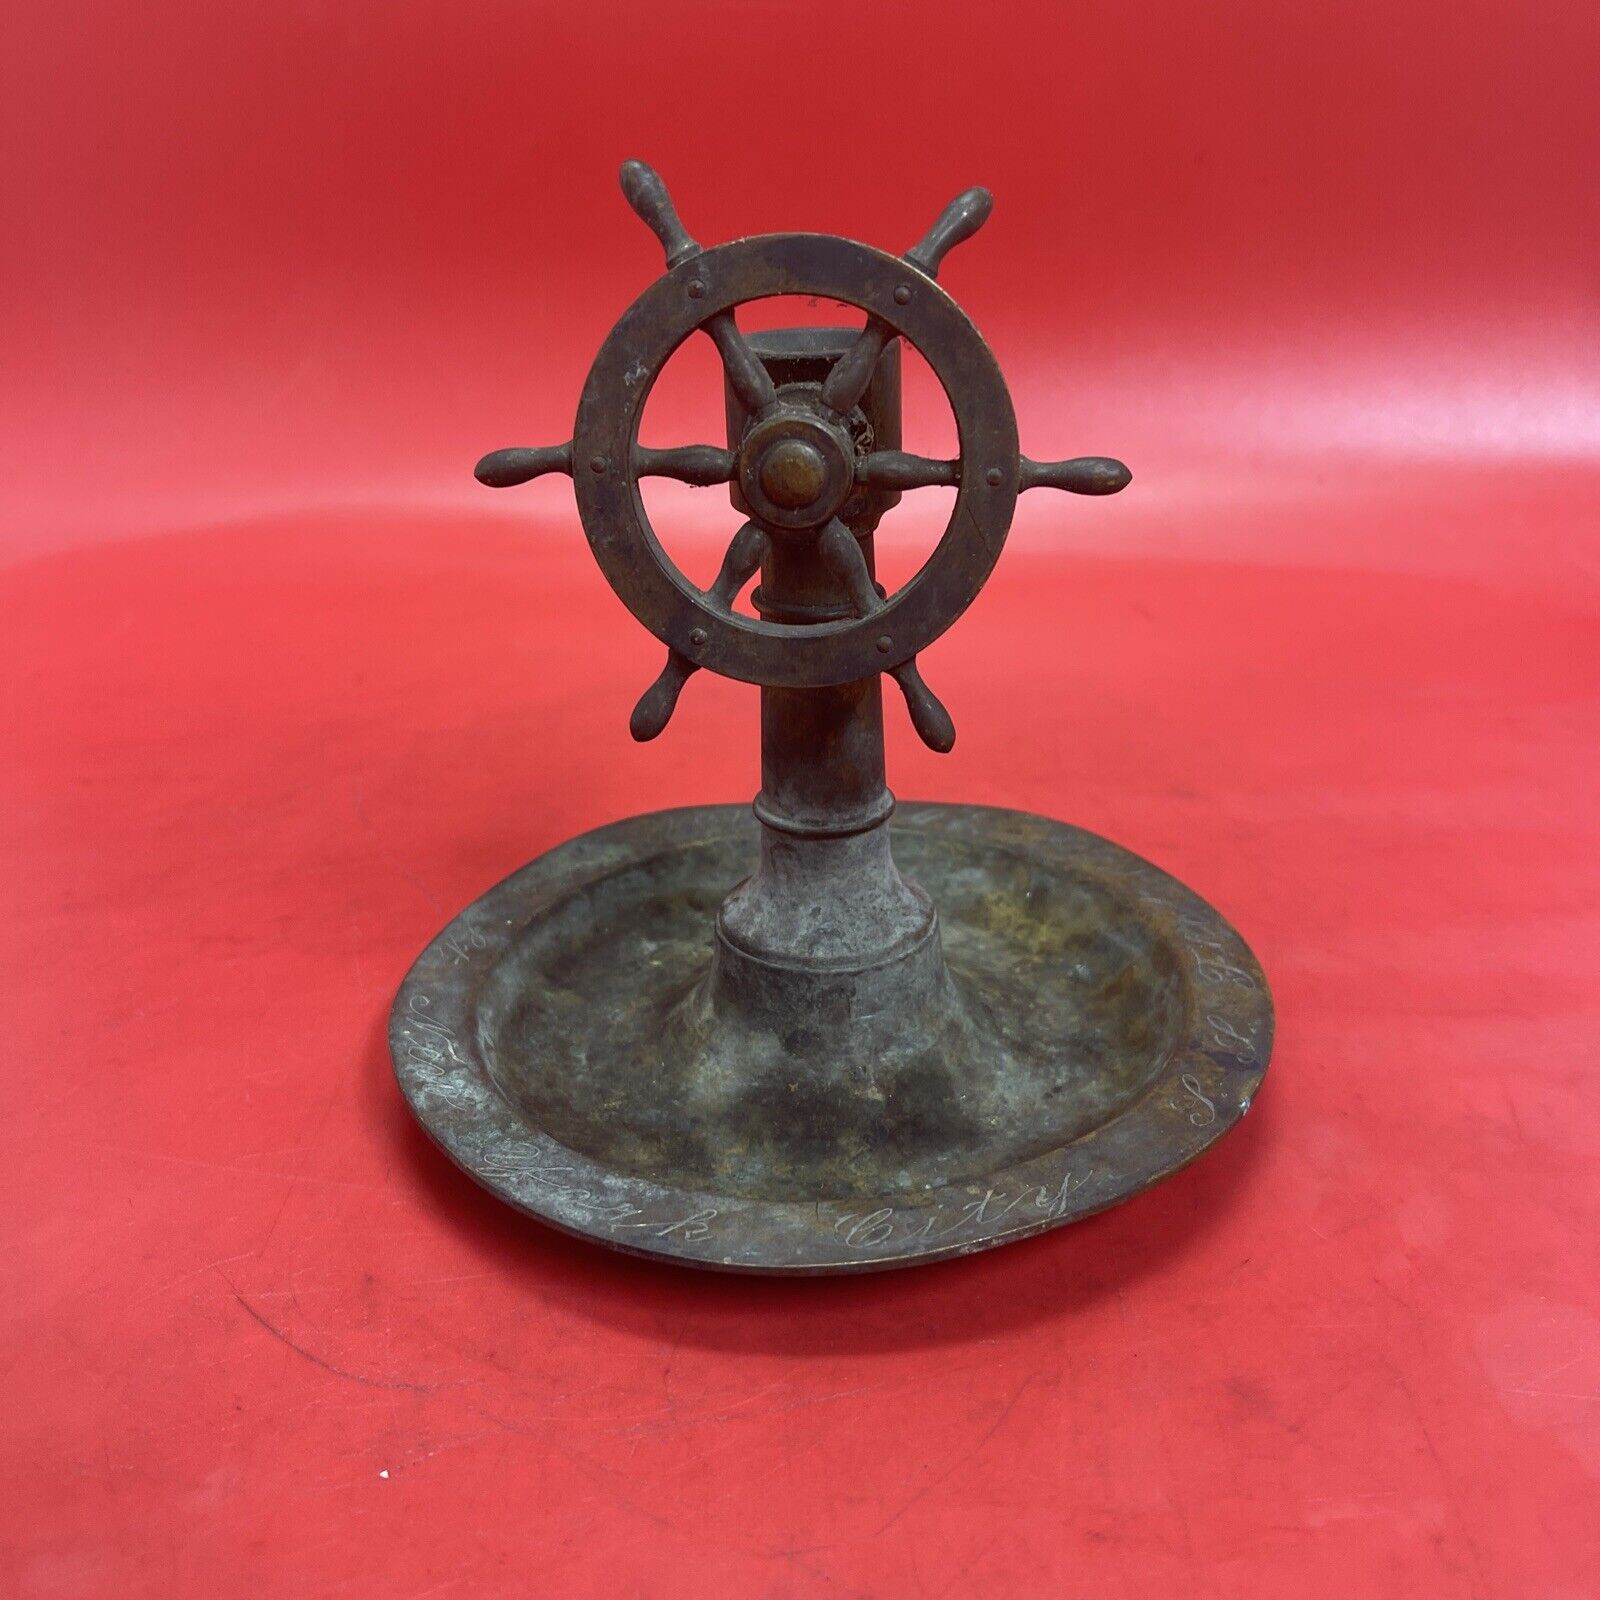 Vintage Solid Brass Ship's Wheel Ashtray